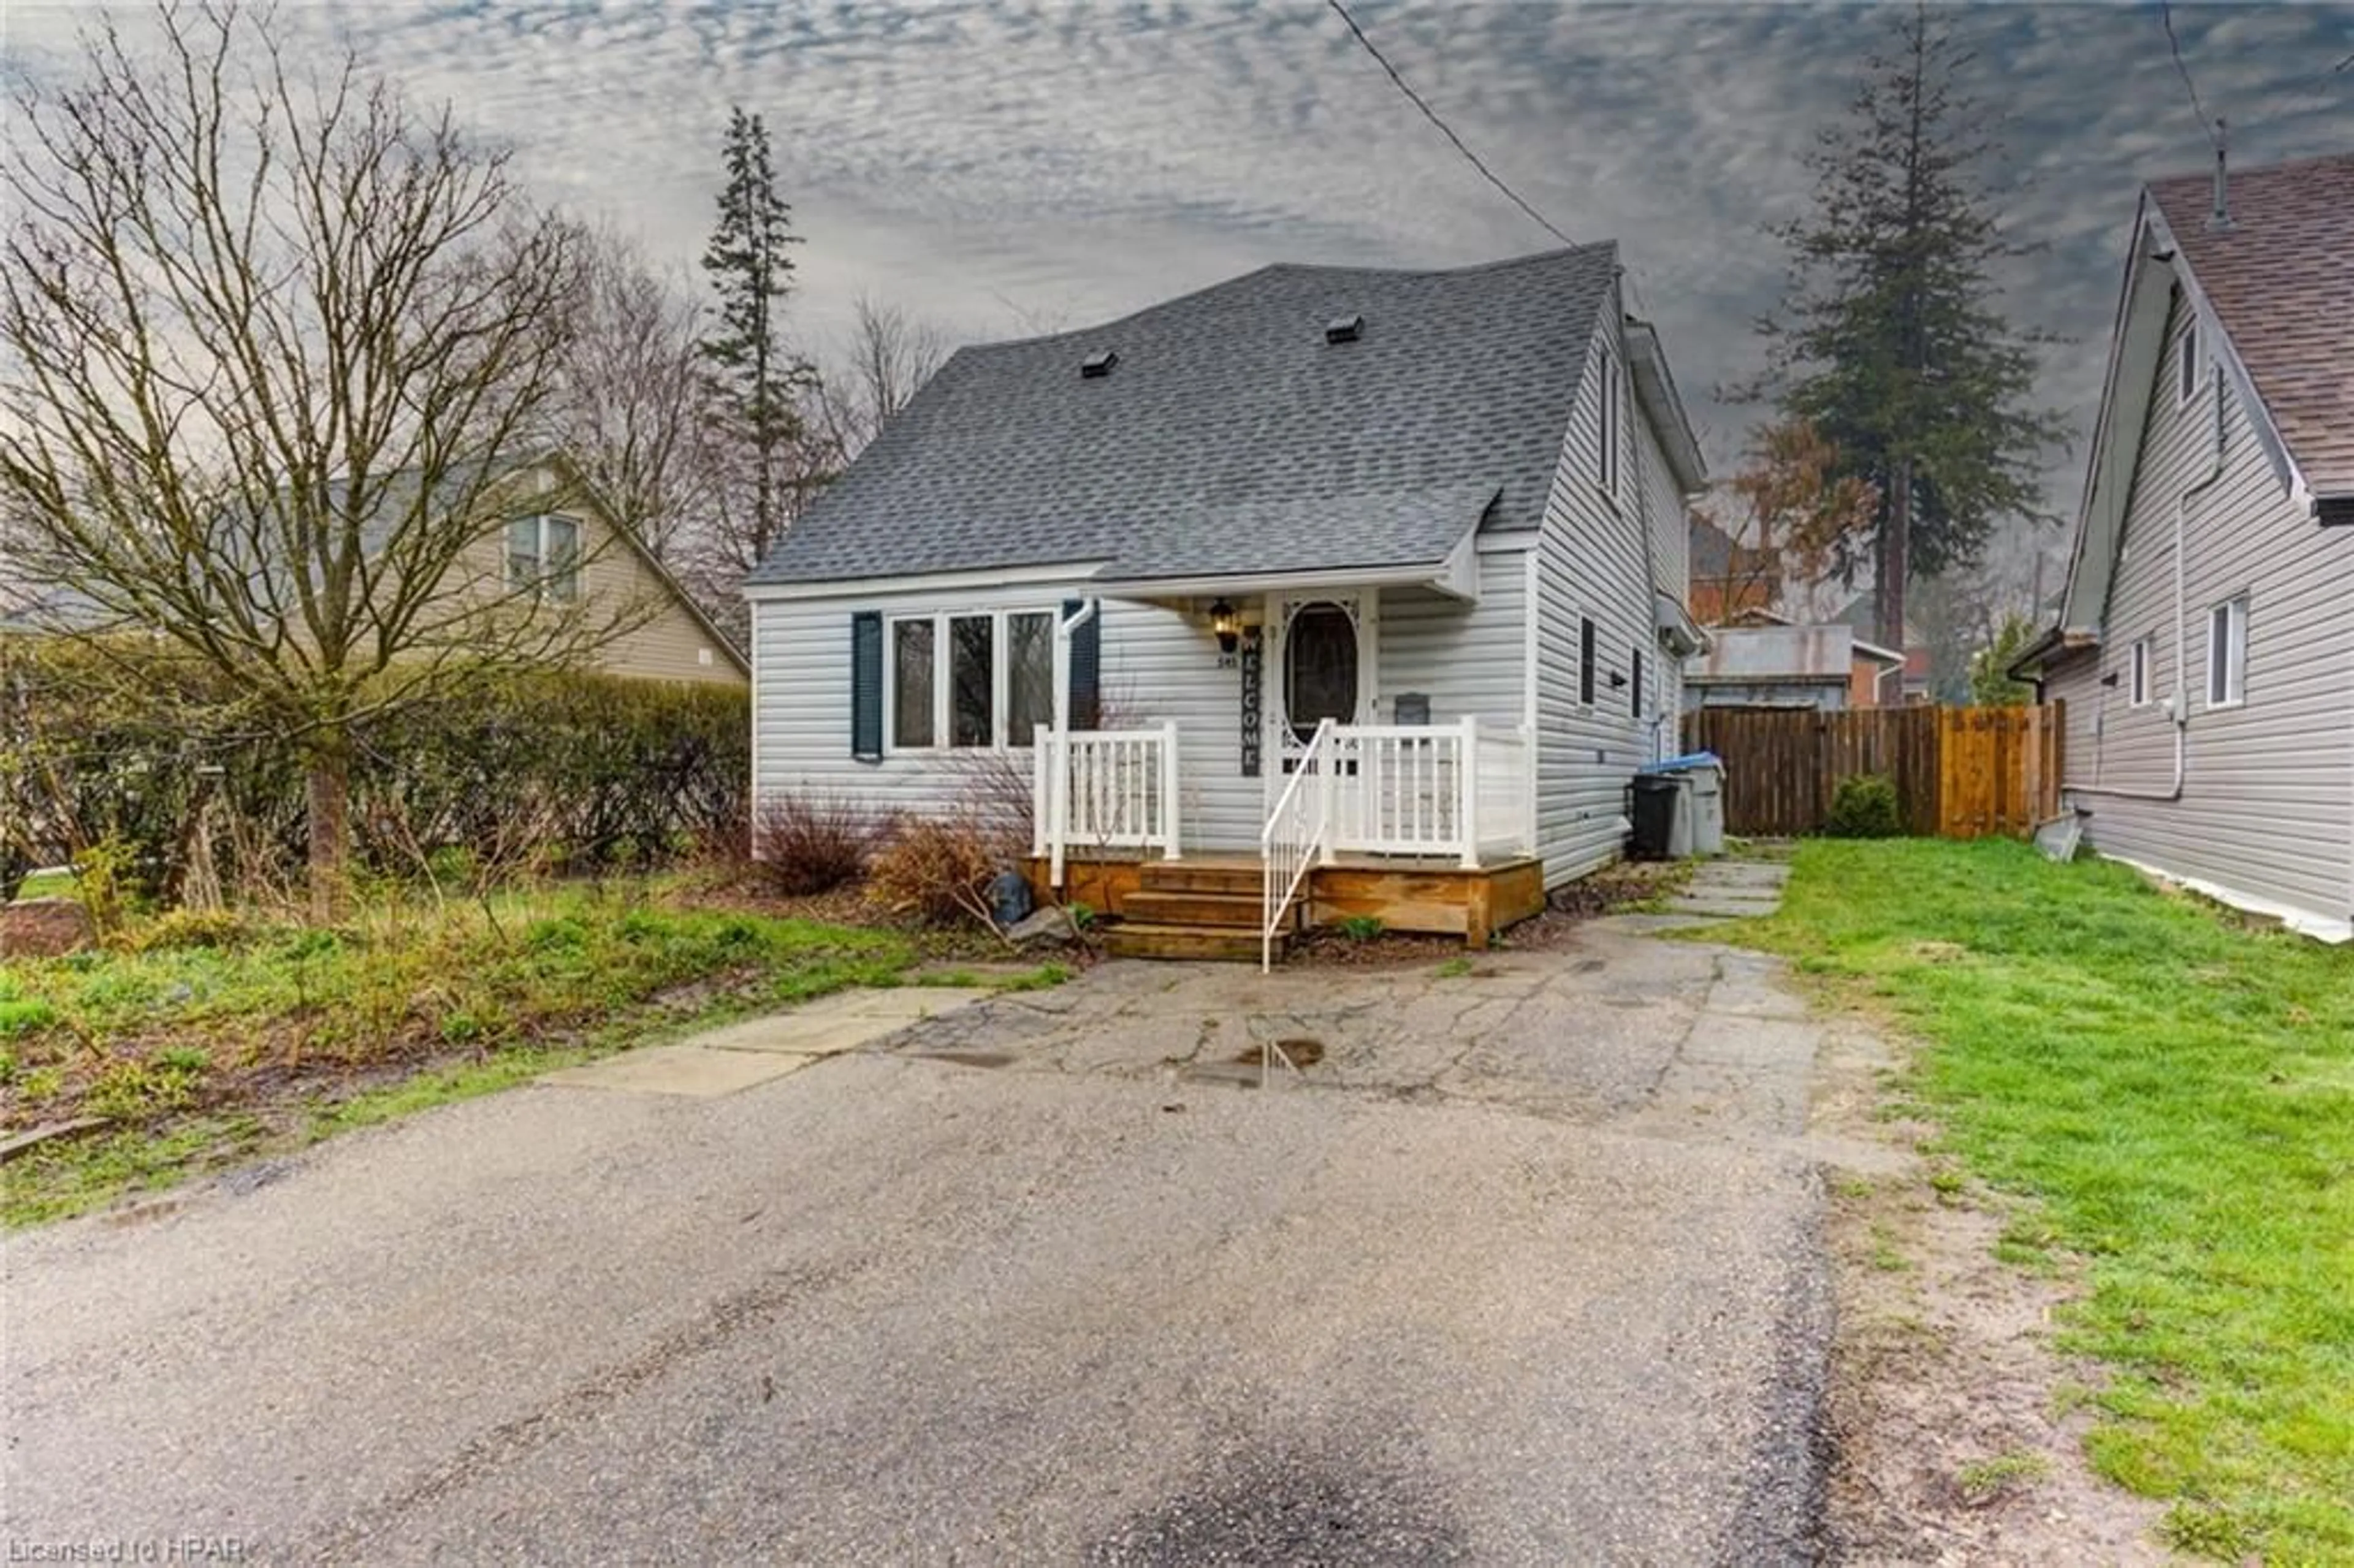 Cottage for 545 York Ave, Listowel Ontario N4W 2X8